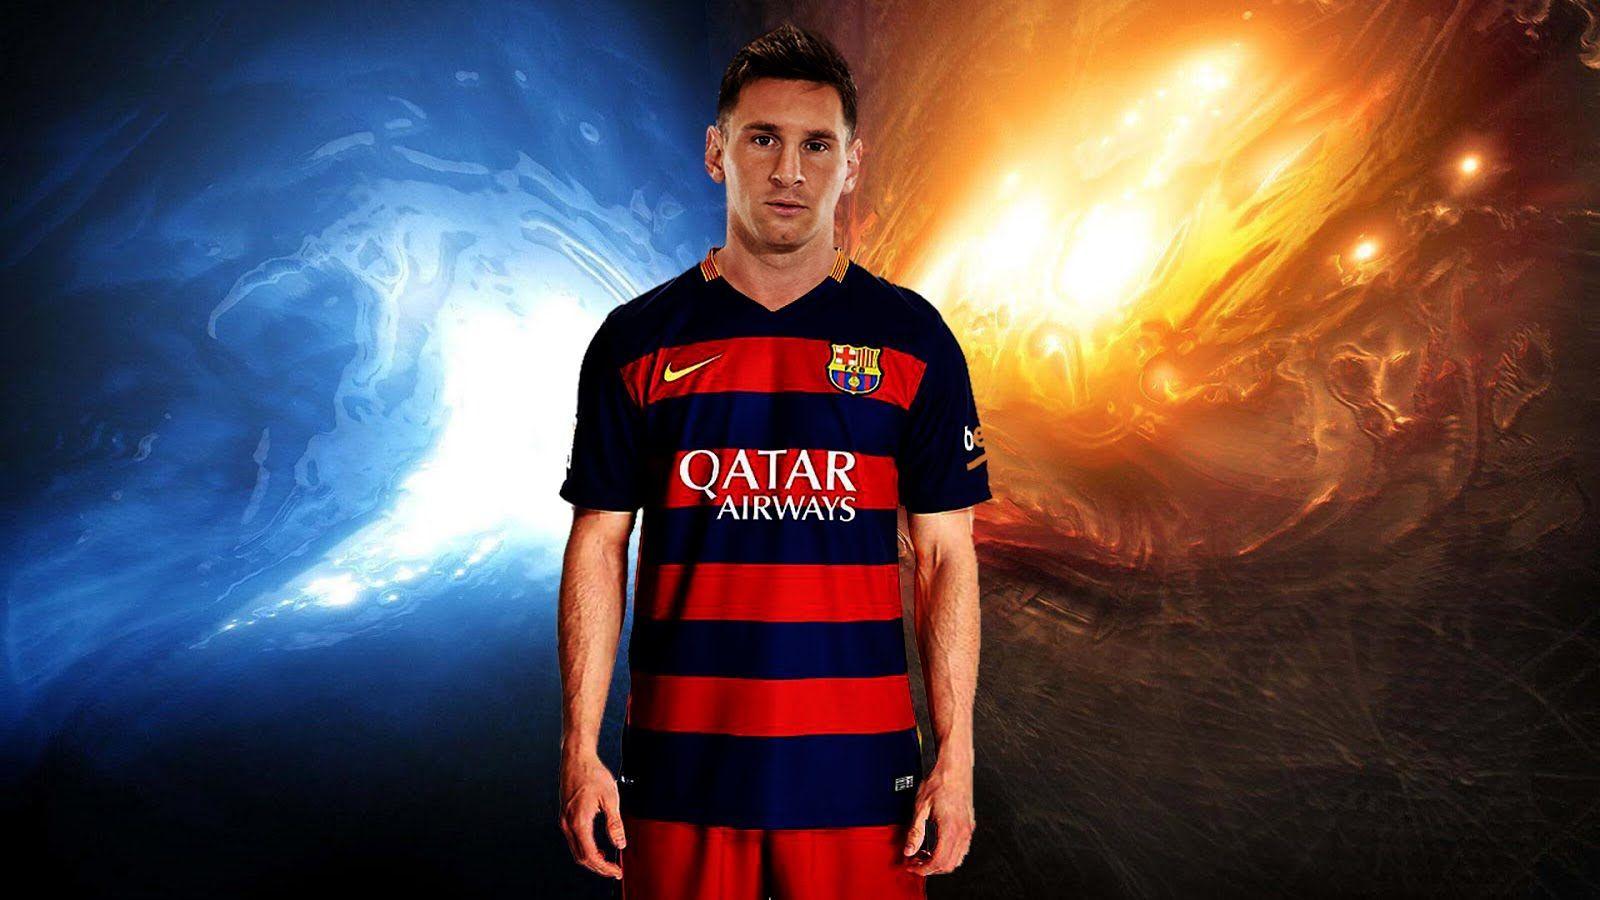 Lionel Messi & Goals of This World. NEW HD